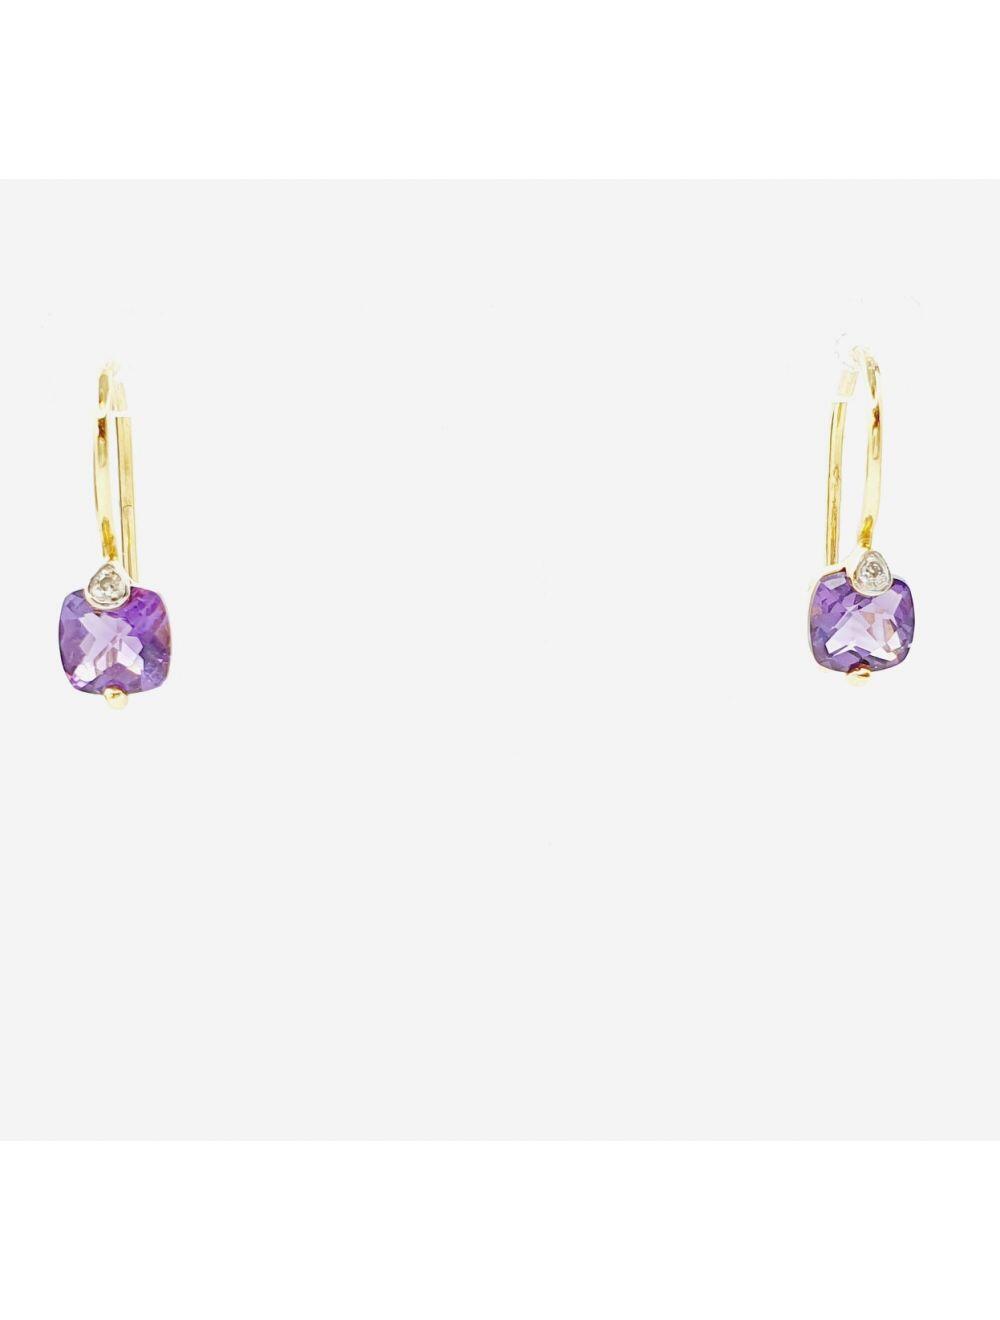 # 18K yellow gold earrings with 0.02ct natural diamonds and amethyst